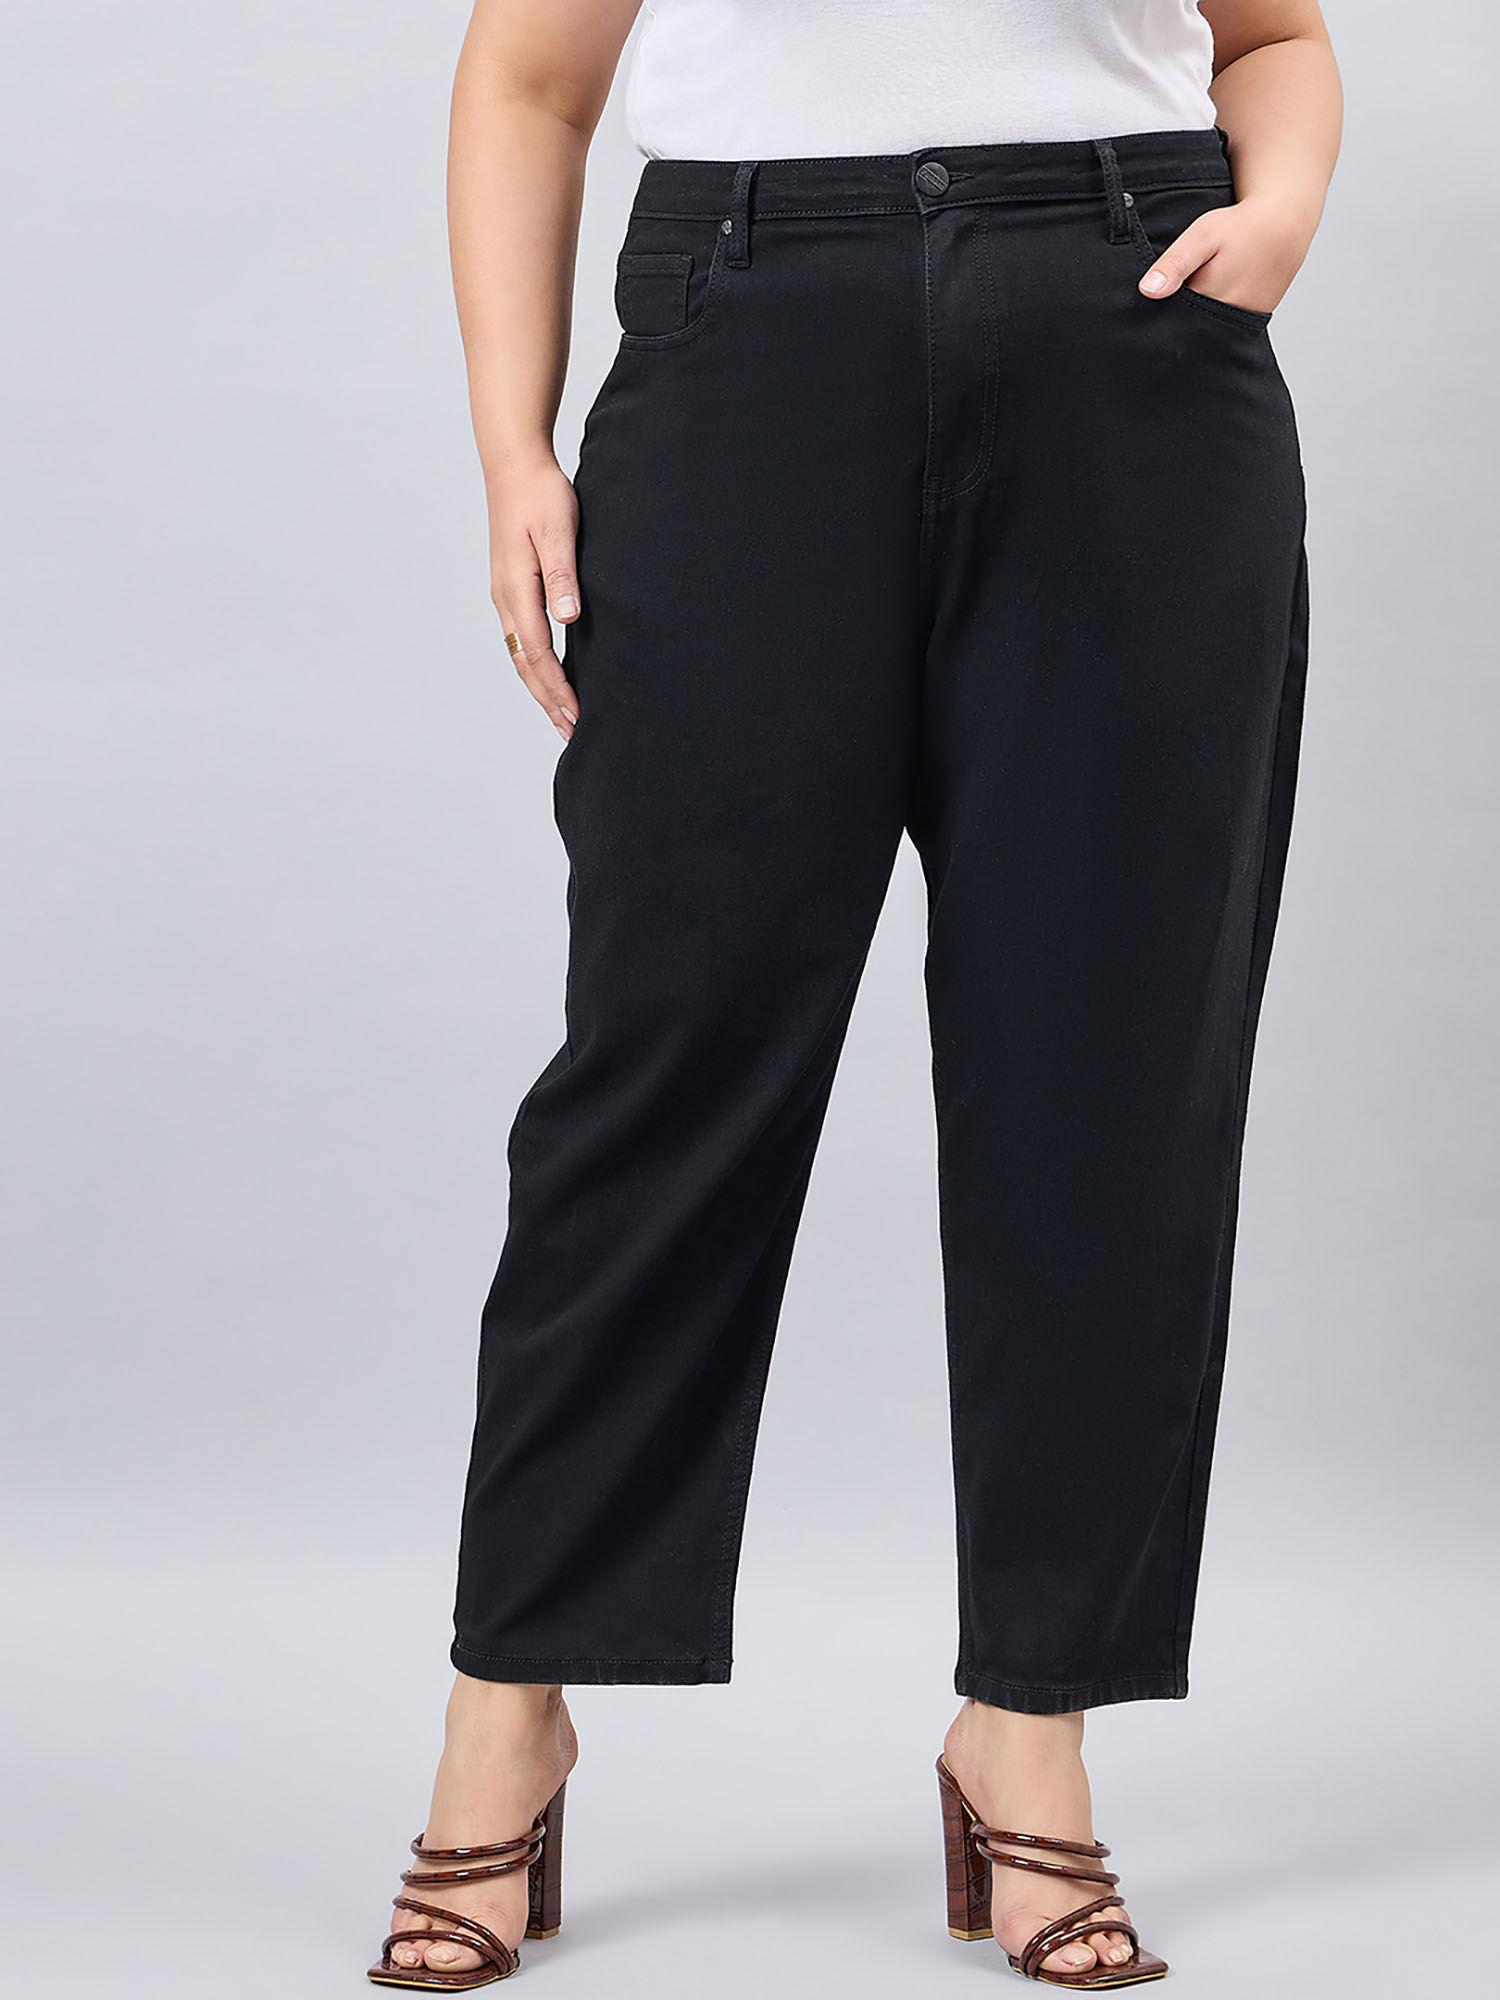 women plus size black mom fit high rise stretchable jeans